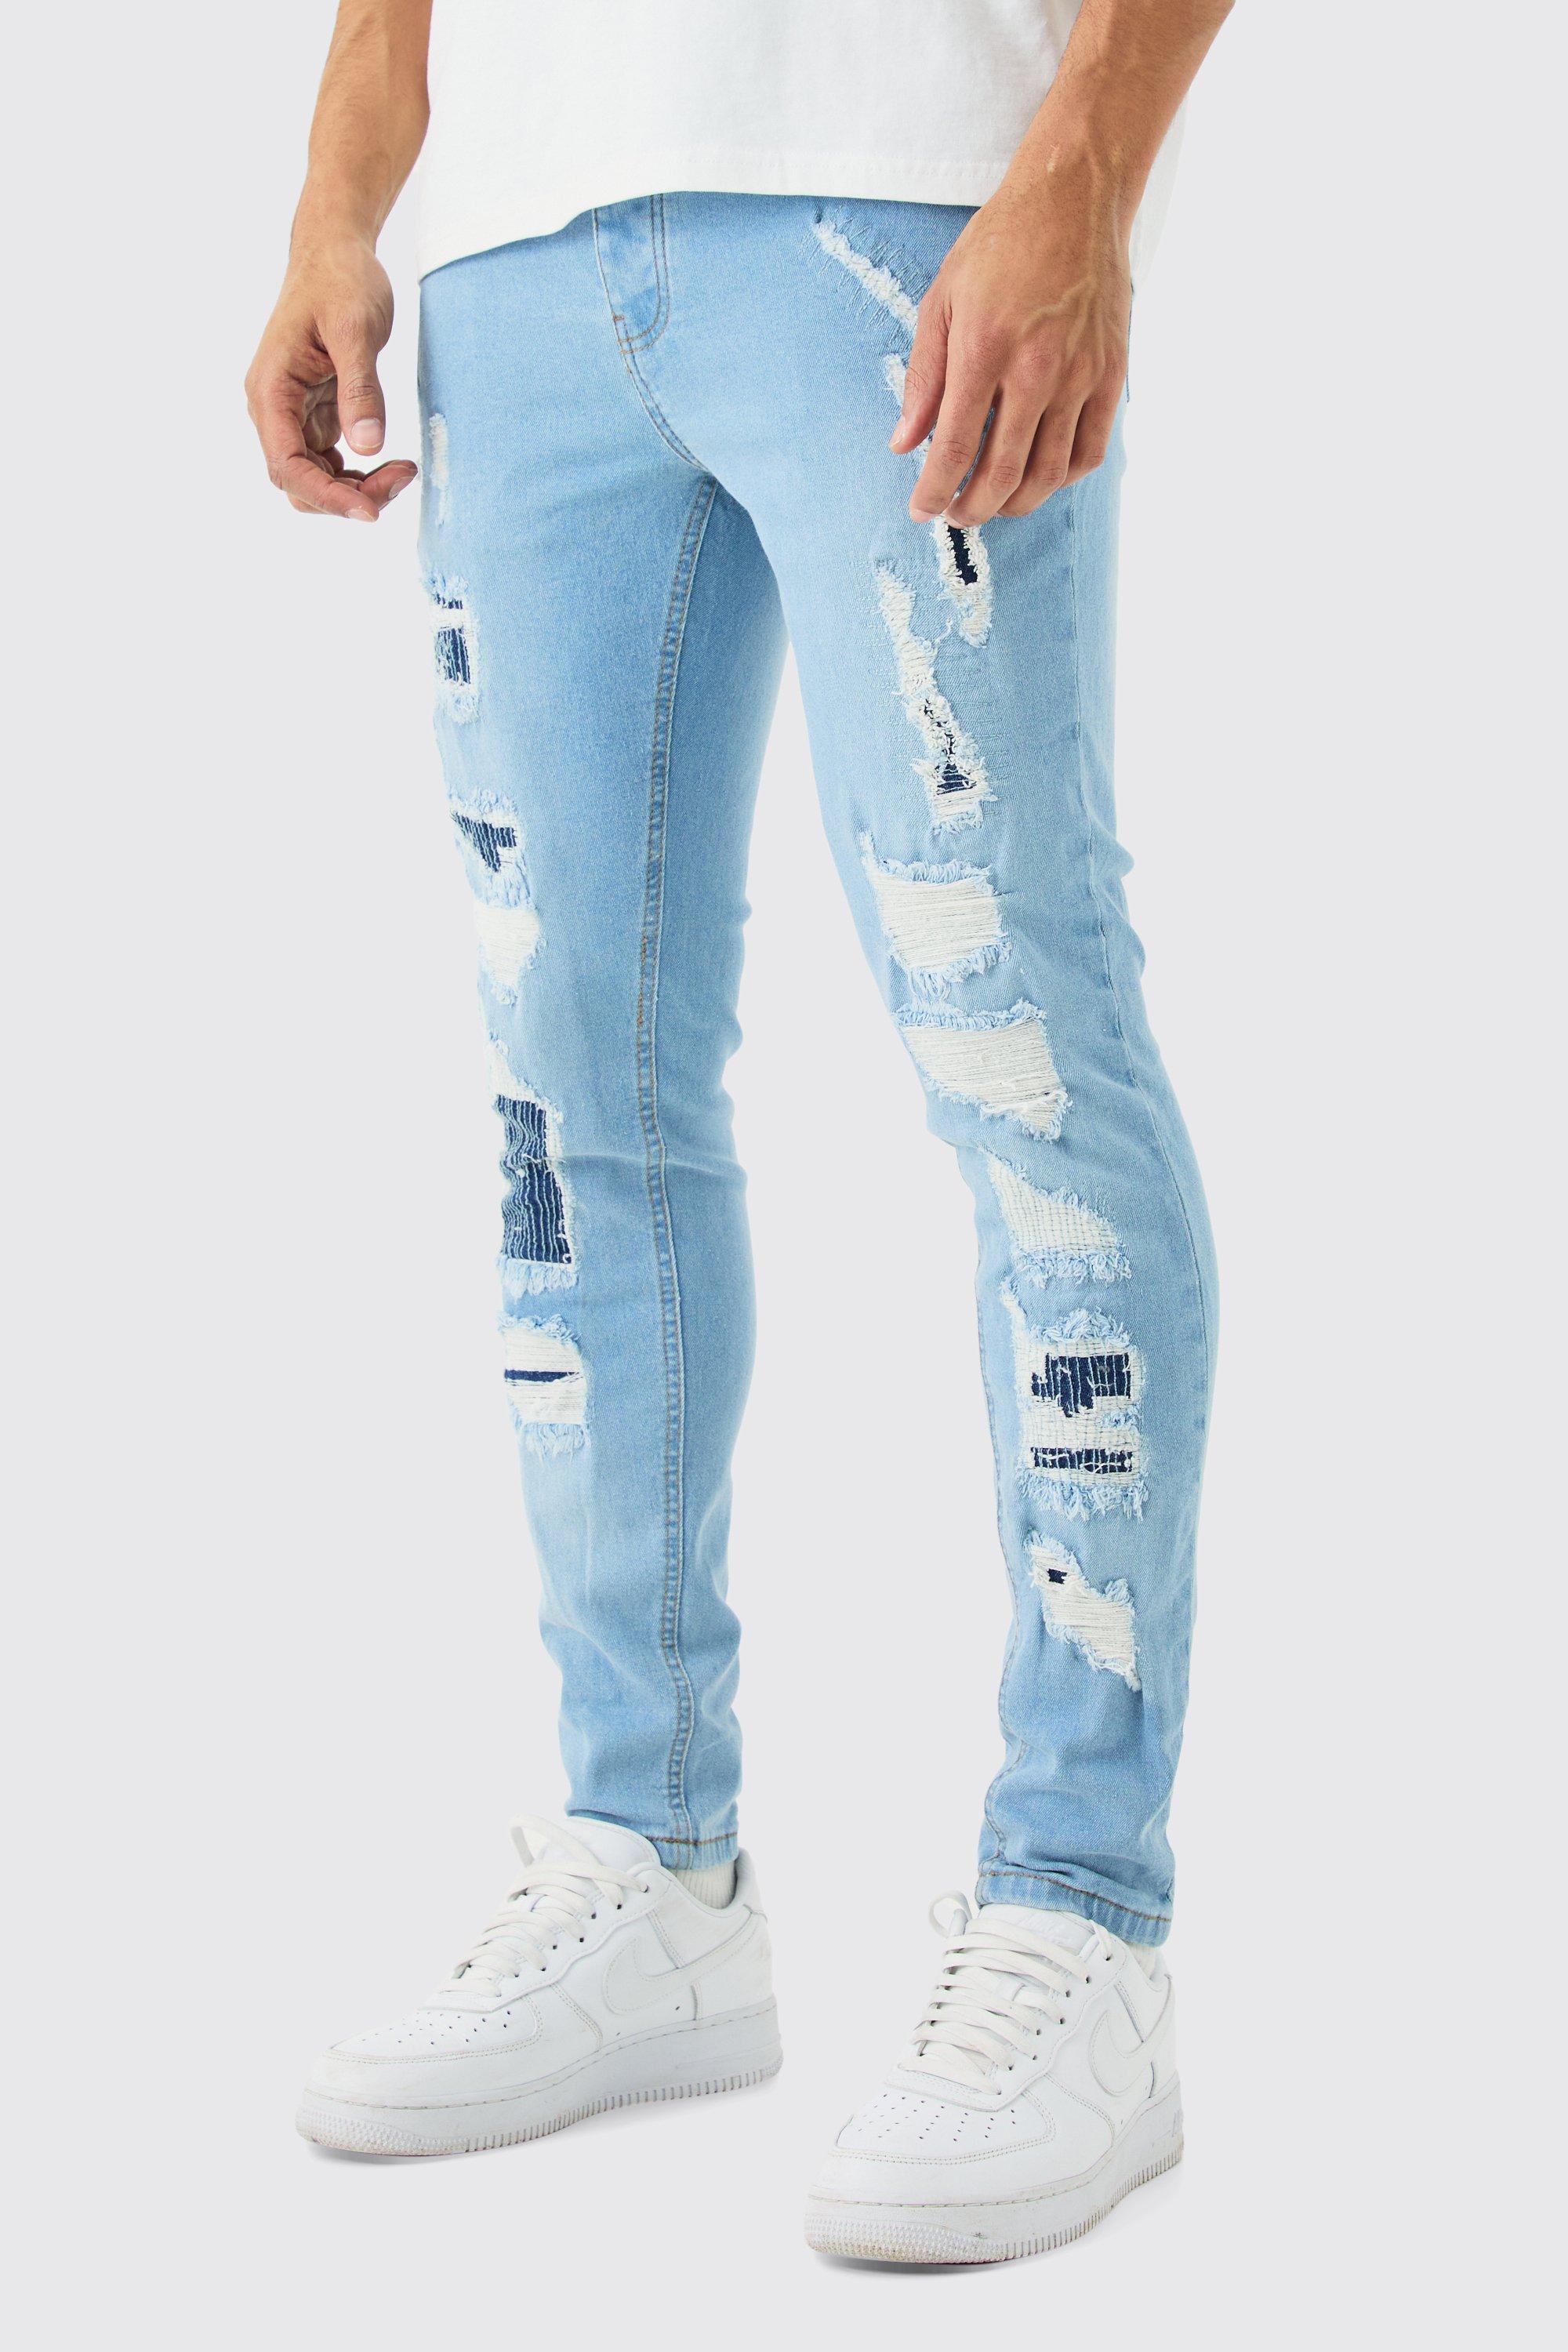 Men's Blue Cotton Ripped Ripped Jeans